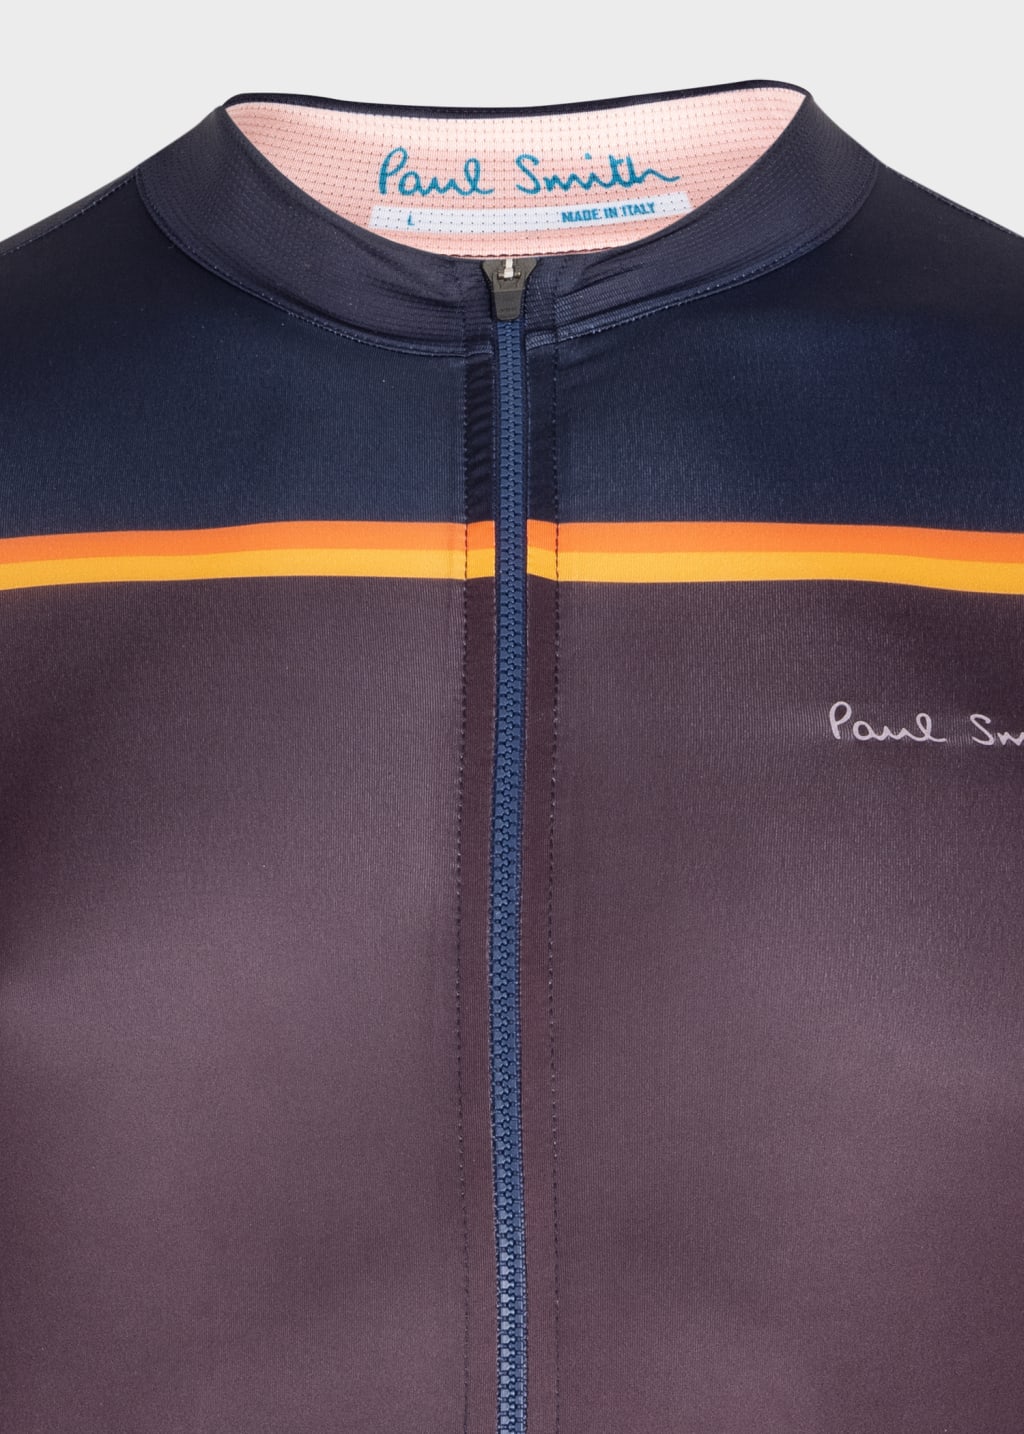 Detail View - Bold Stripe Race Fit Cycling Jersey Paul Smith